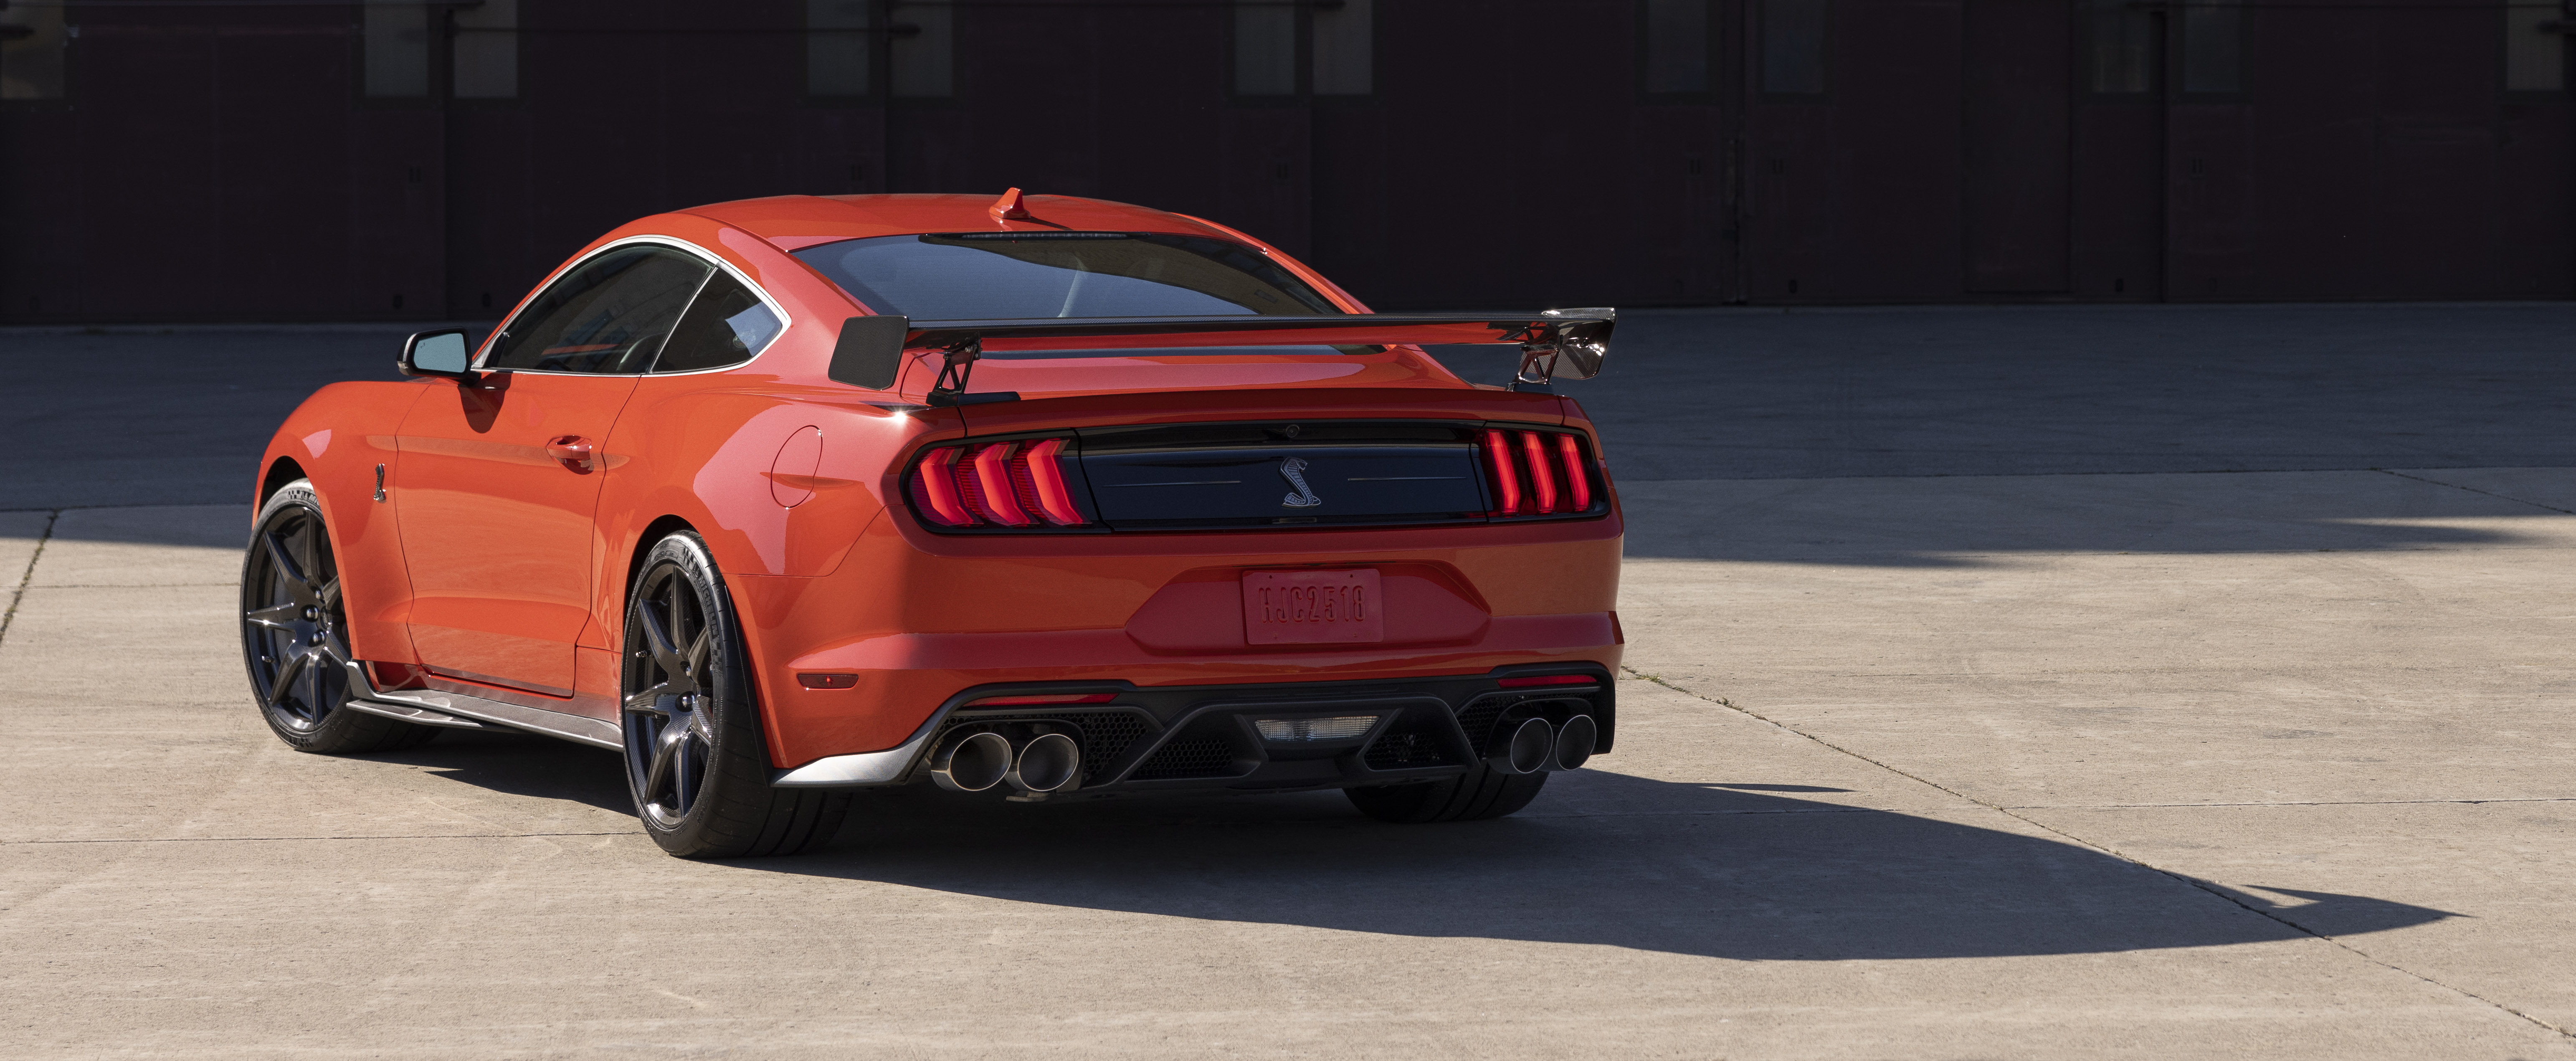 Mustang Family Grows with New Limited-Edition 2022 Mustang Shelby GT500  Heritage Edition, First-ever Mustang Coastal Edition, Plus Ford  Performance-Exclusive Code Orange Paint | Ford Media Center